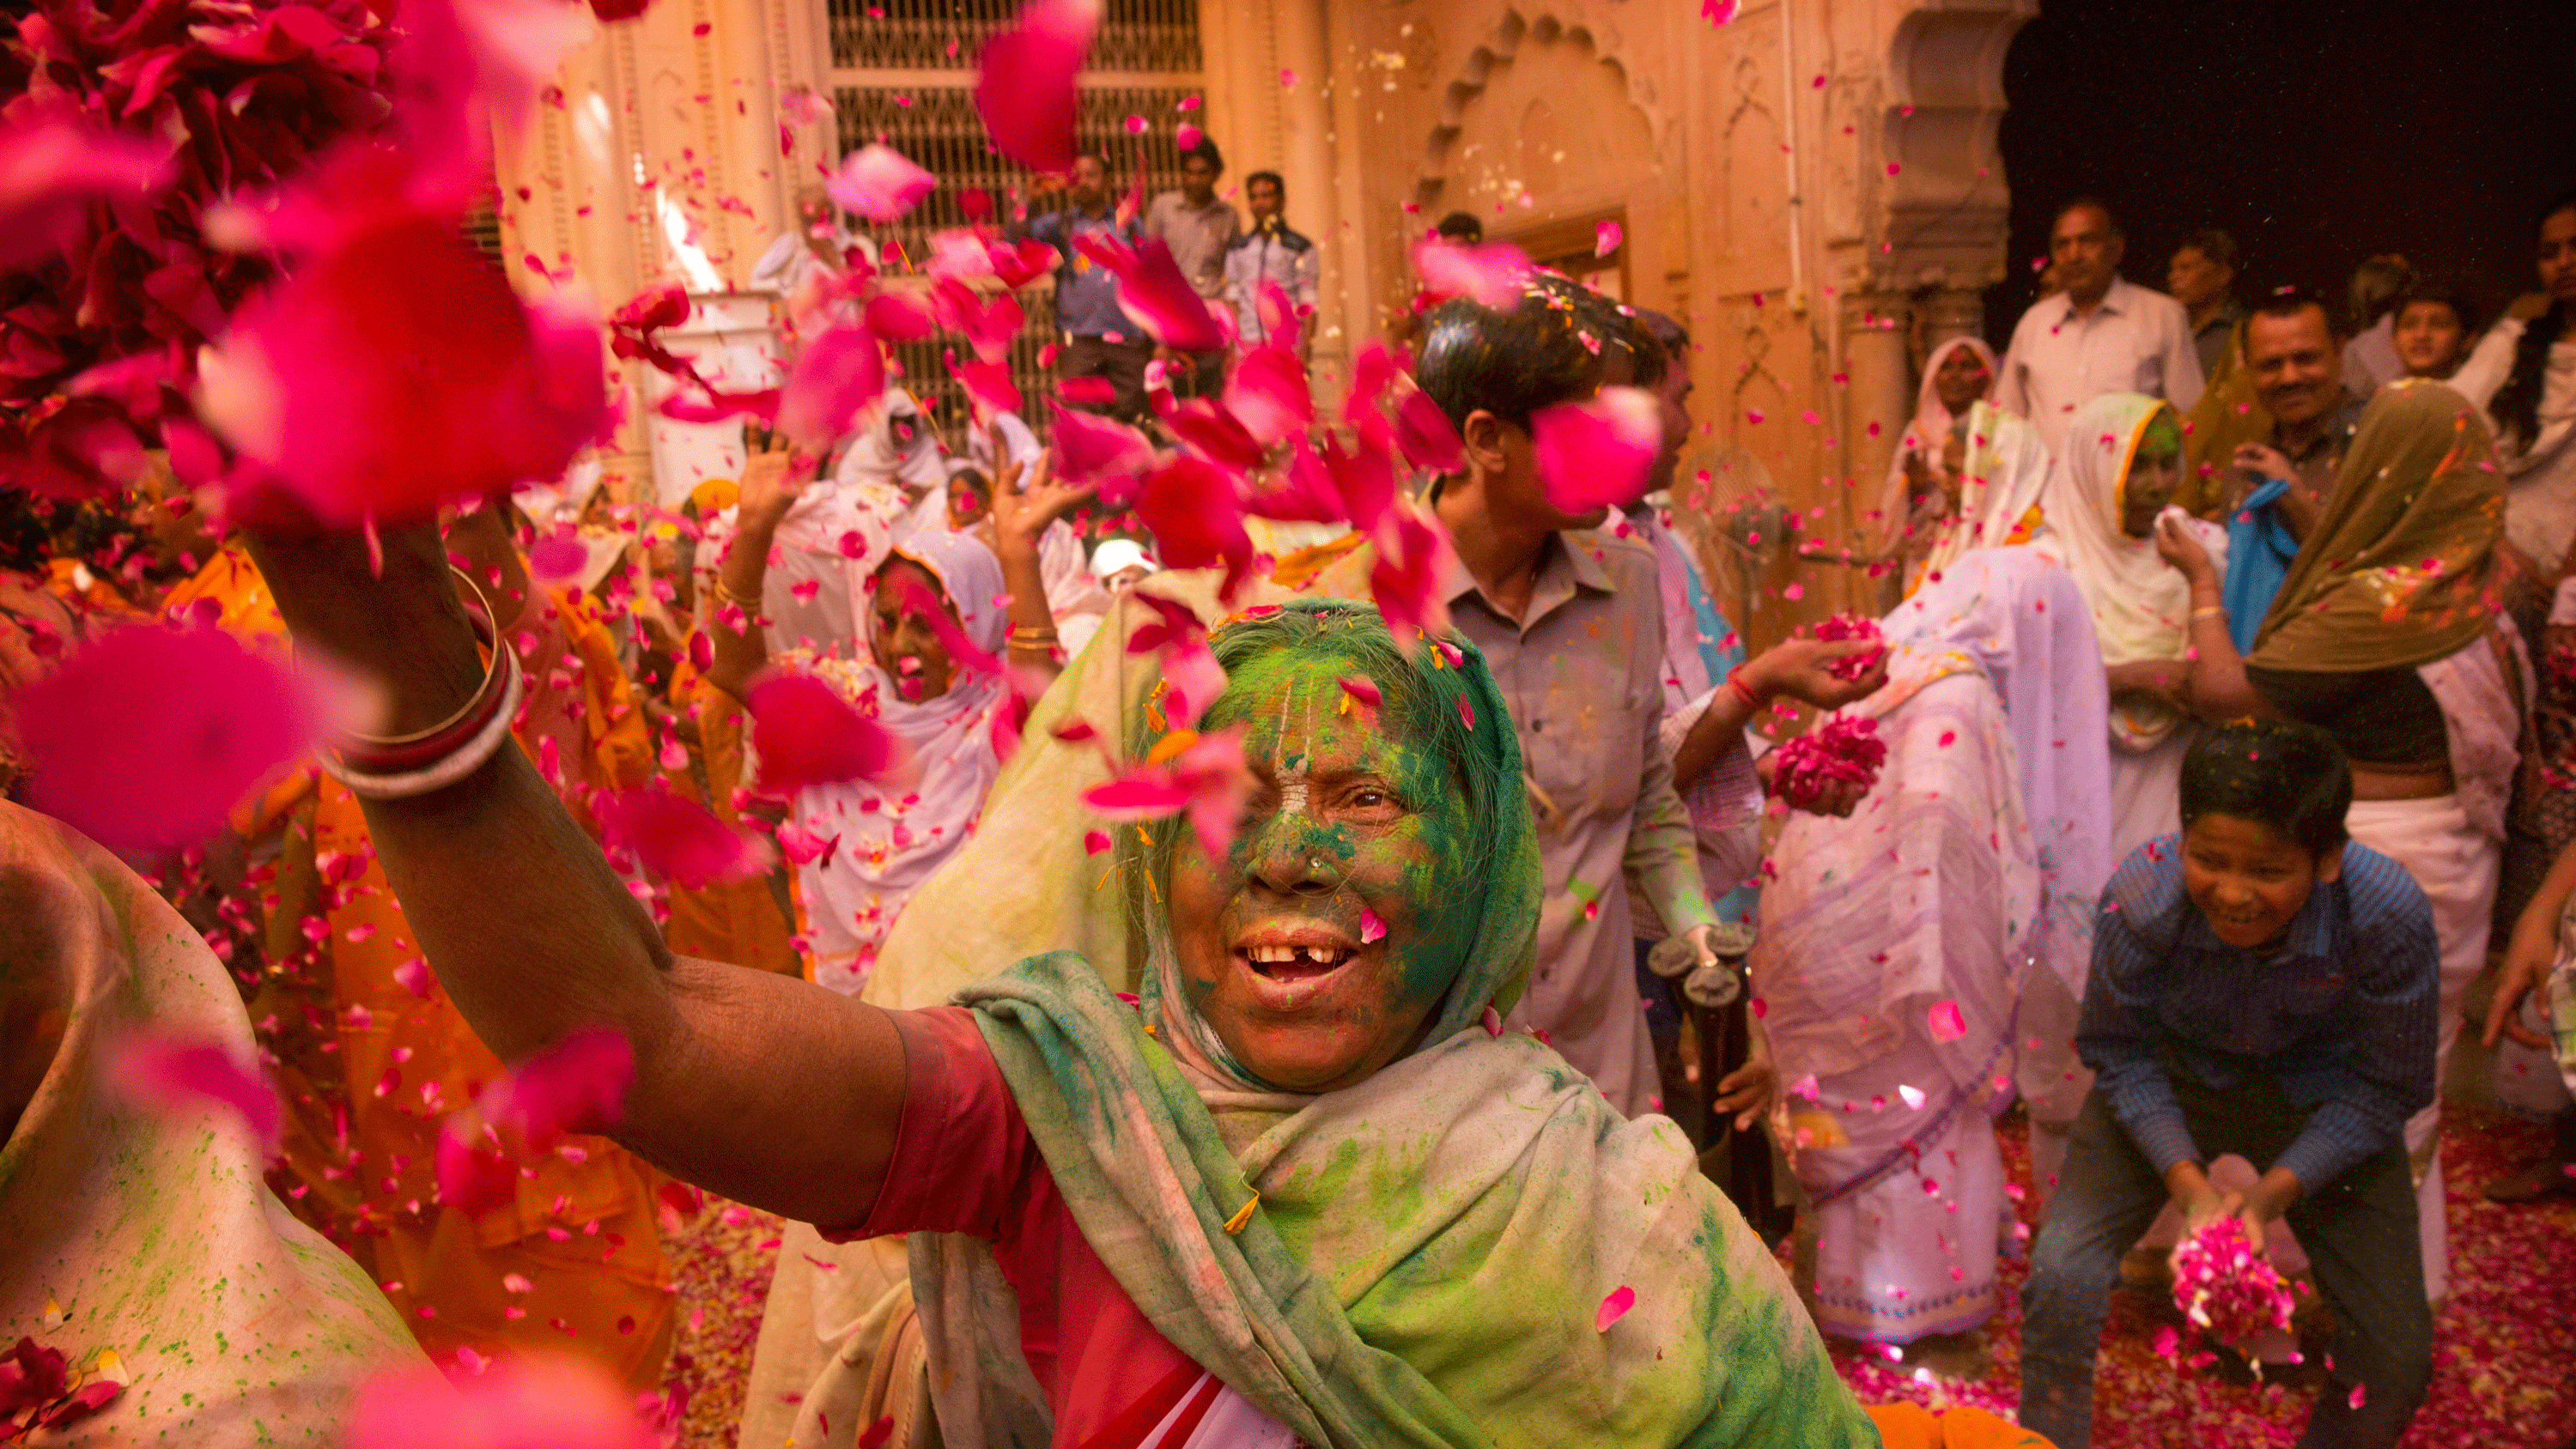 Widows throw flower petals and colored powder during Holi celebrations at the Gopinath temple, Vrindavan.